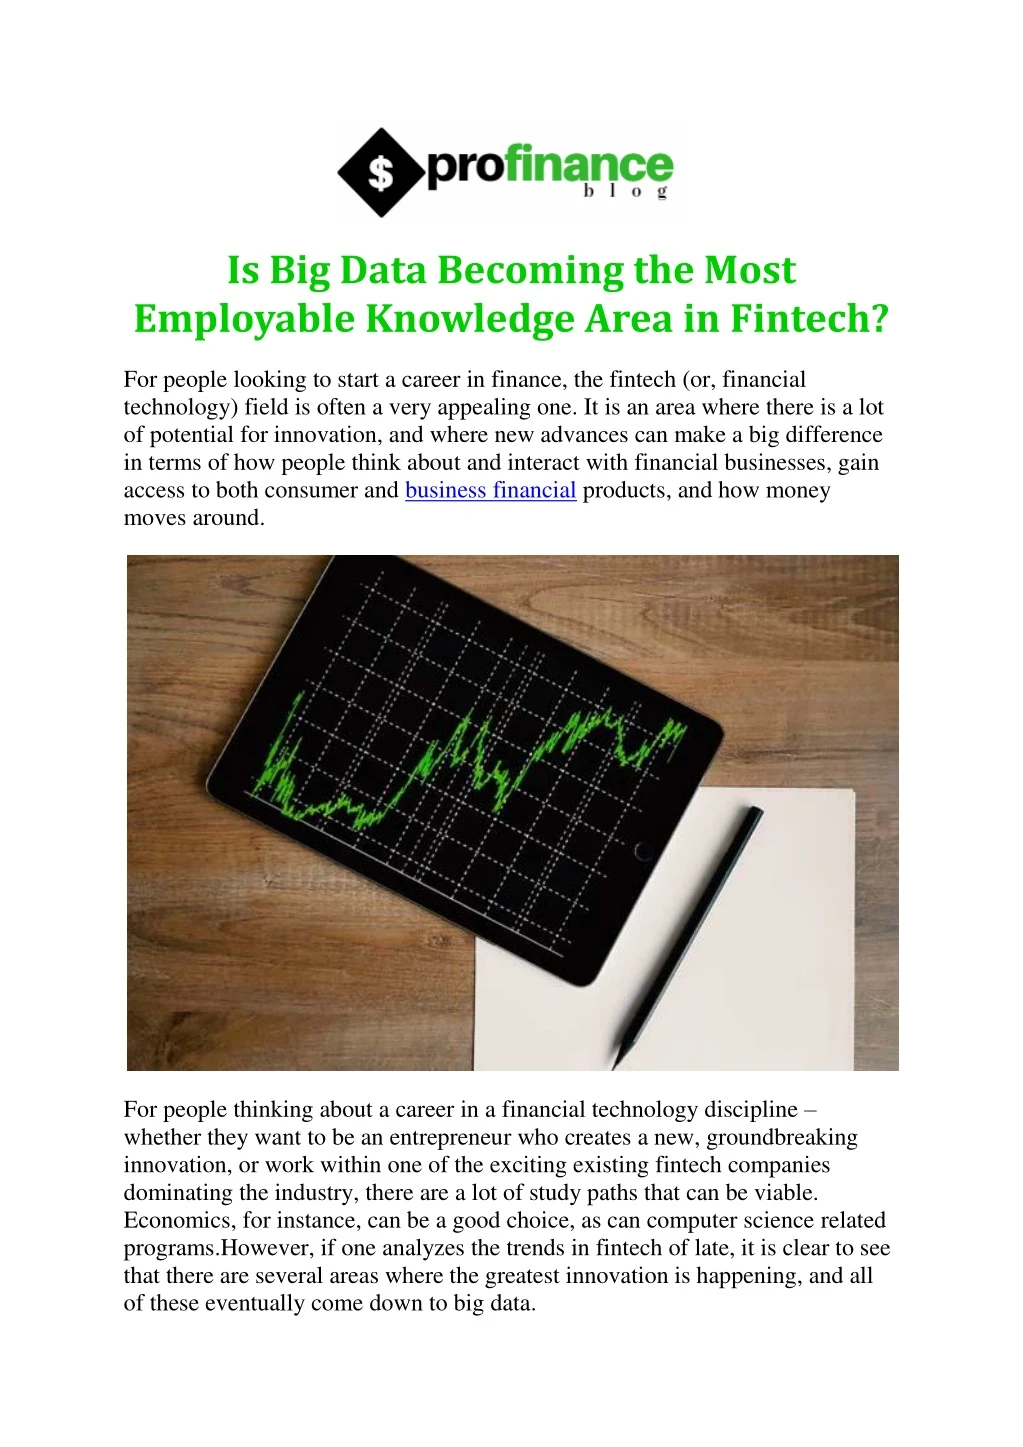 is big data becoming the most employable